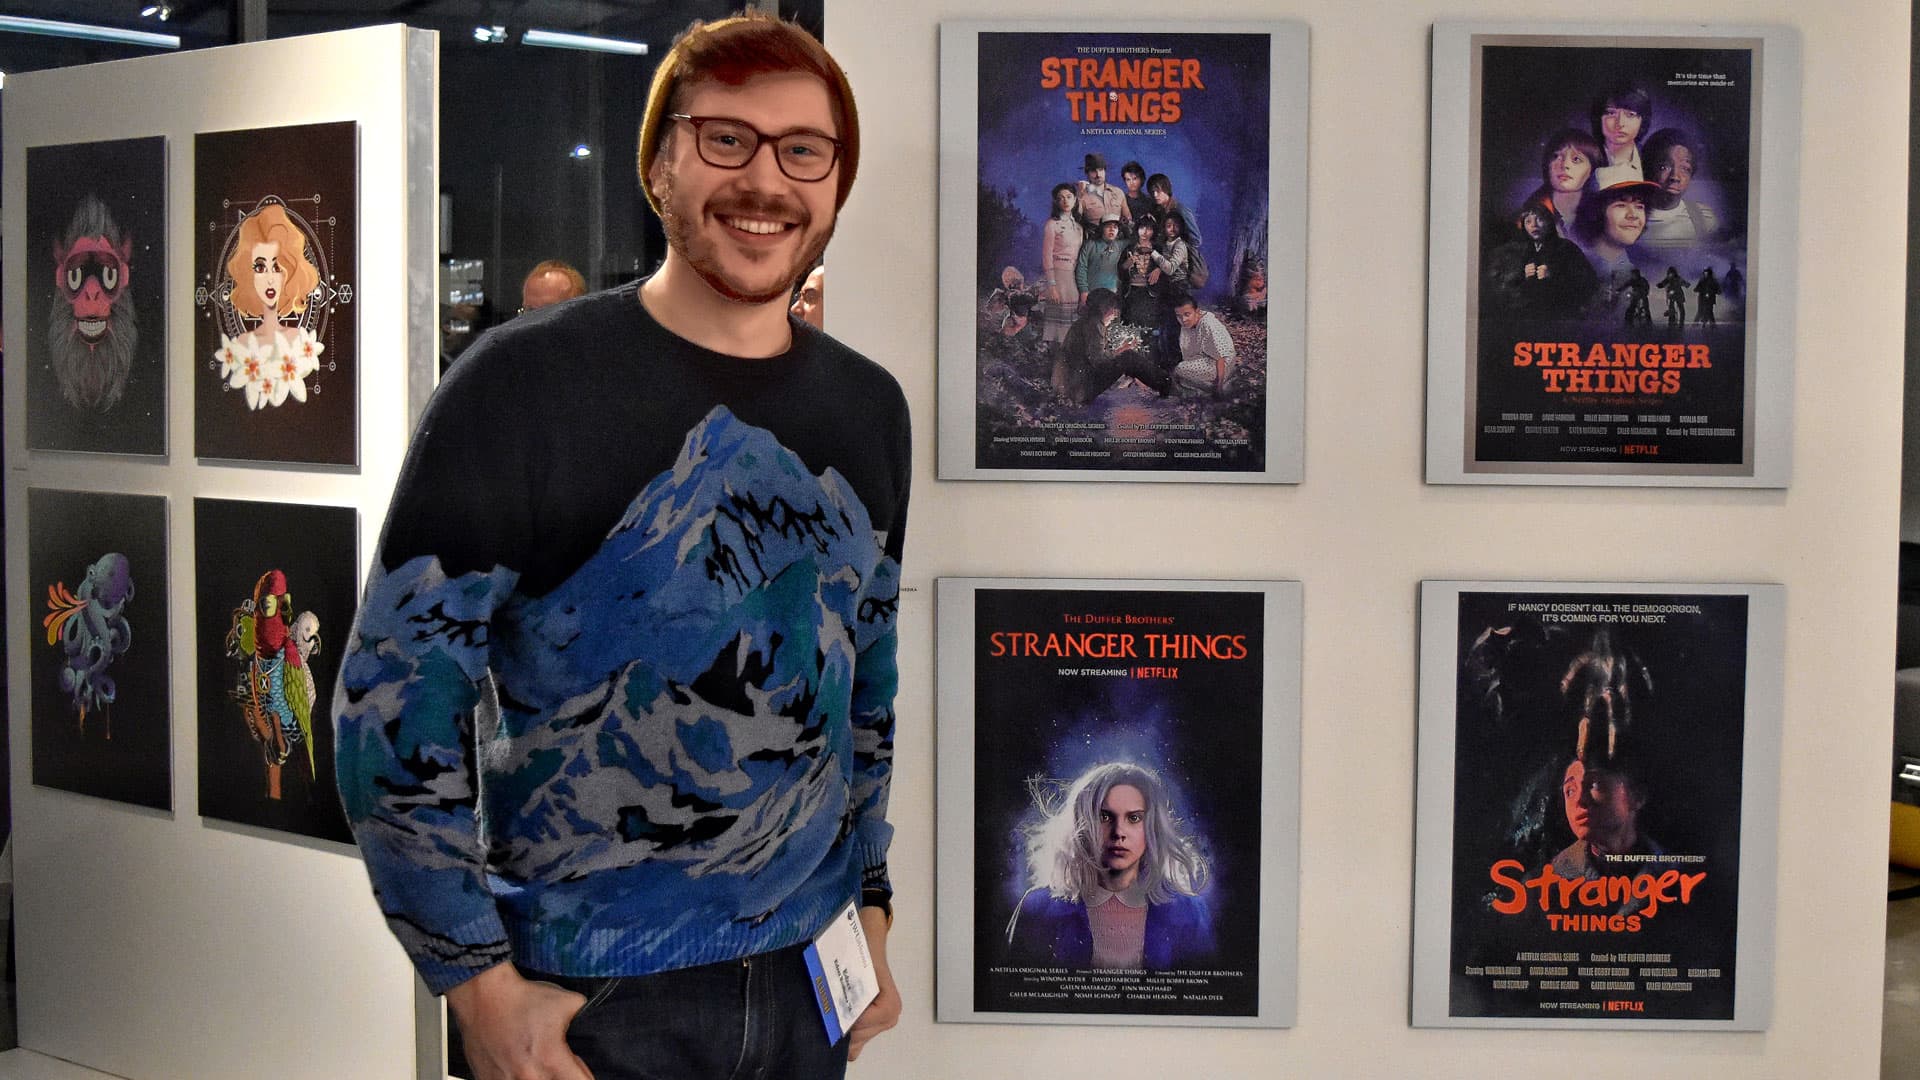 JWU alum Edzer Roukema in front of his poster series for the Netflix series, “Stranger Things”